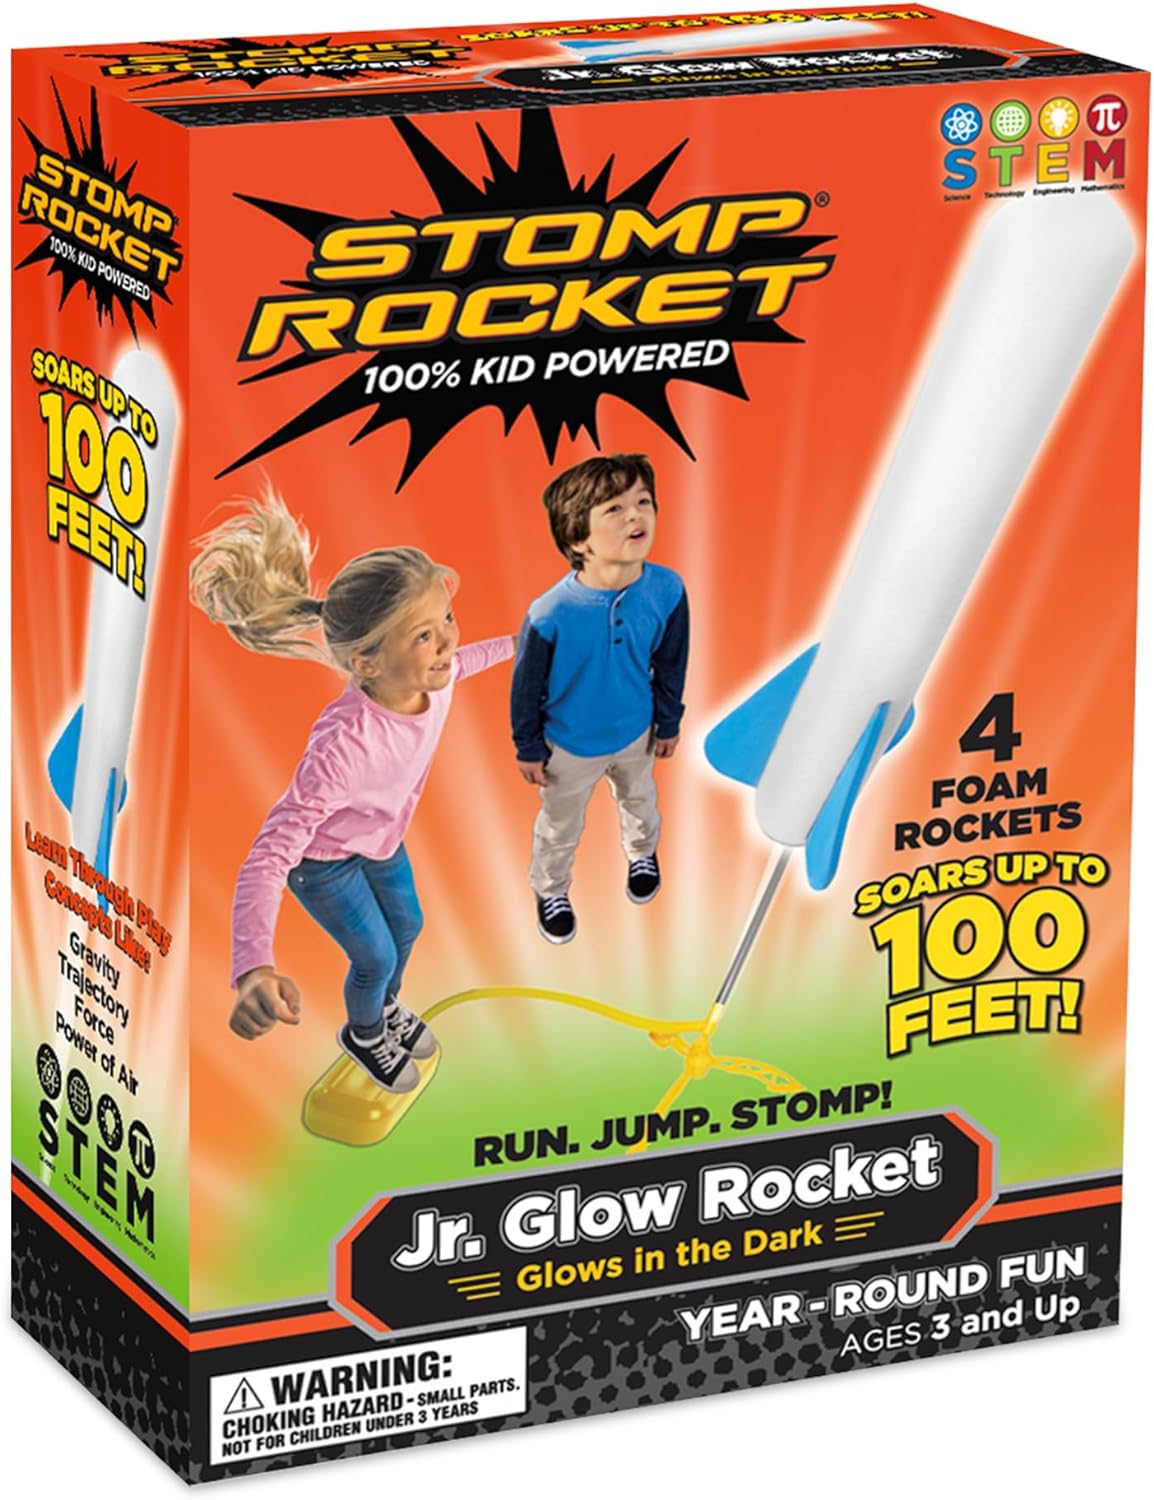 Stomp Rocket® Original Jr. Glow Rocket Launcher for Kids, Soars up to 100 Ft, 4 Foam Rockets and Adjustable Launcher, Gift for Boys and Girls Ages 3 Years and up - image 1 of 8